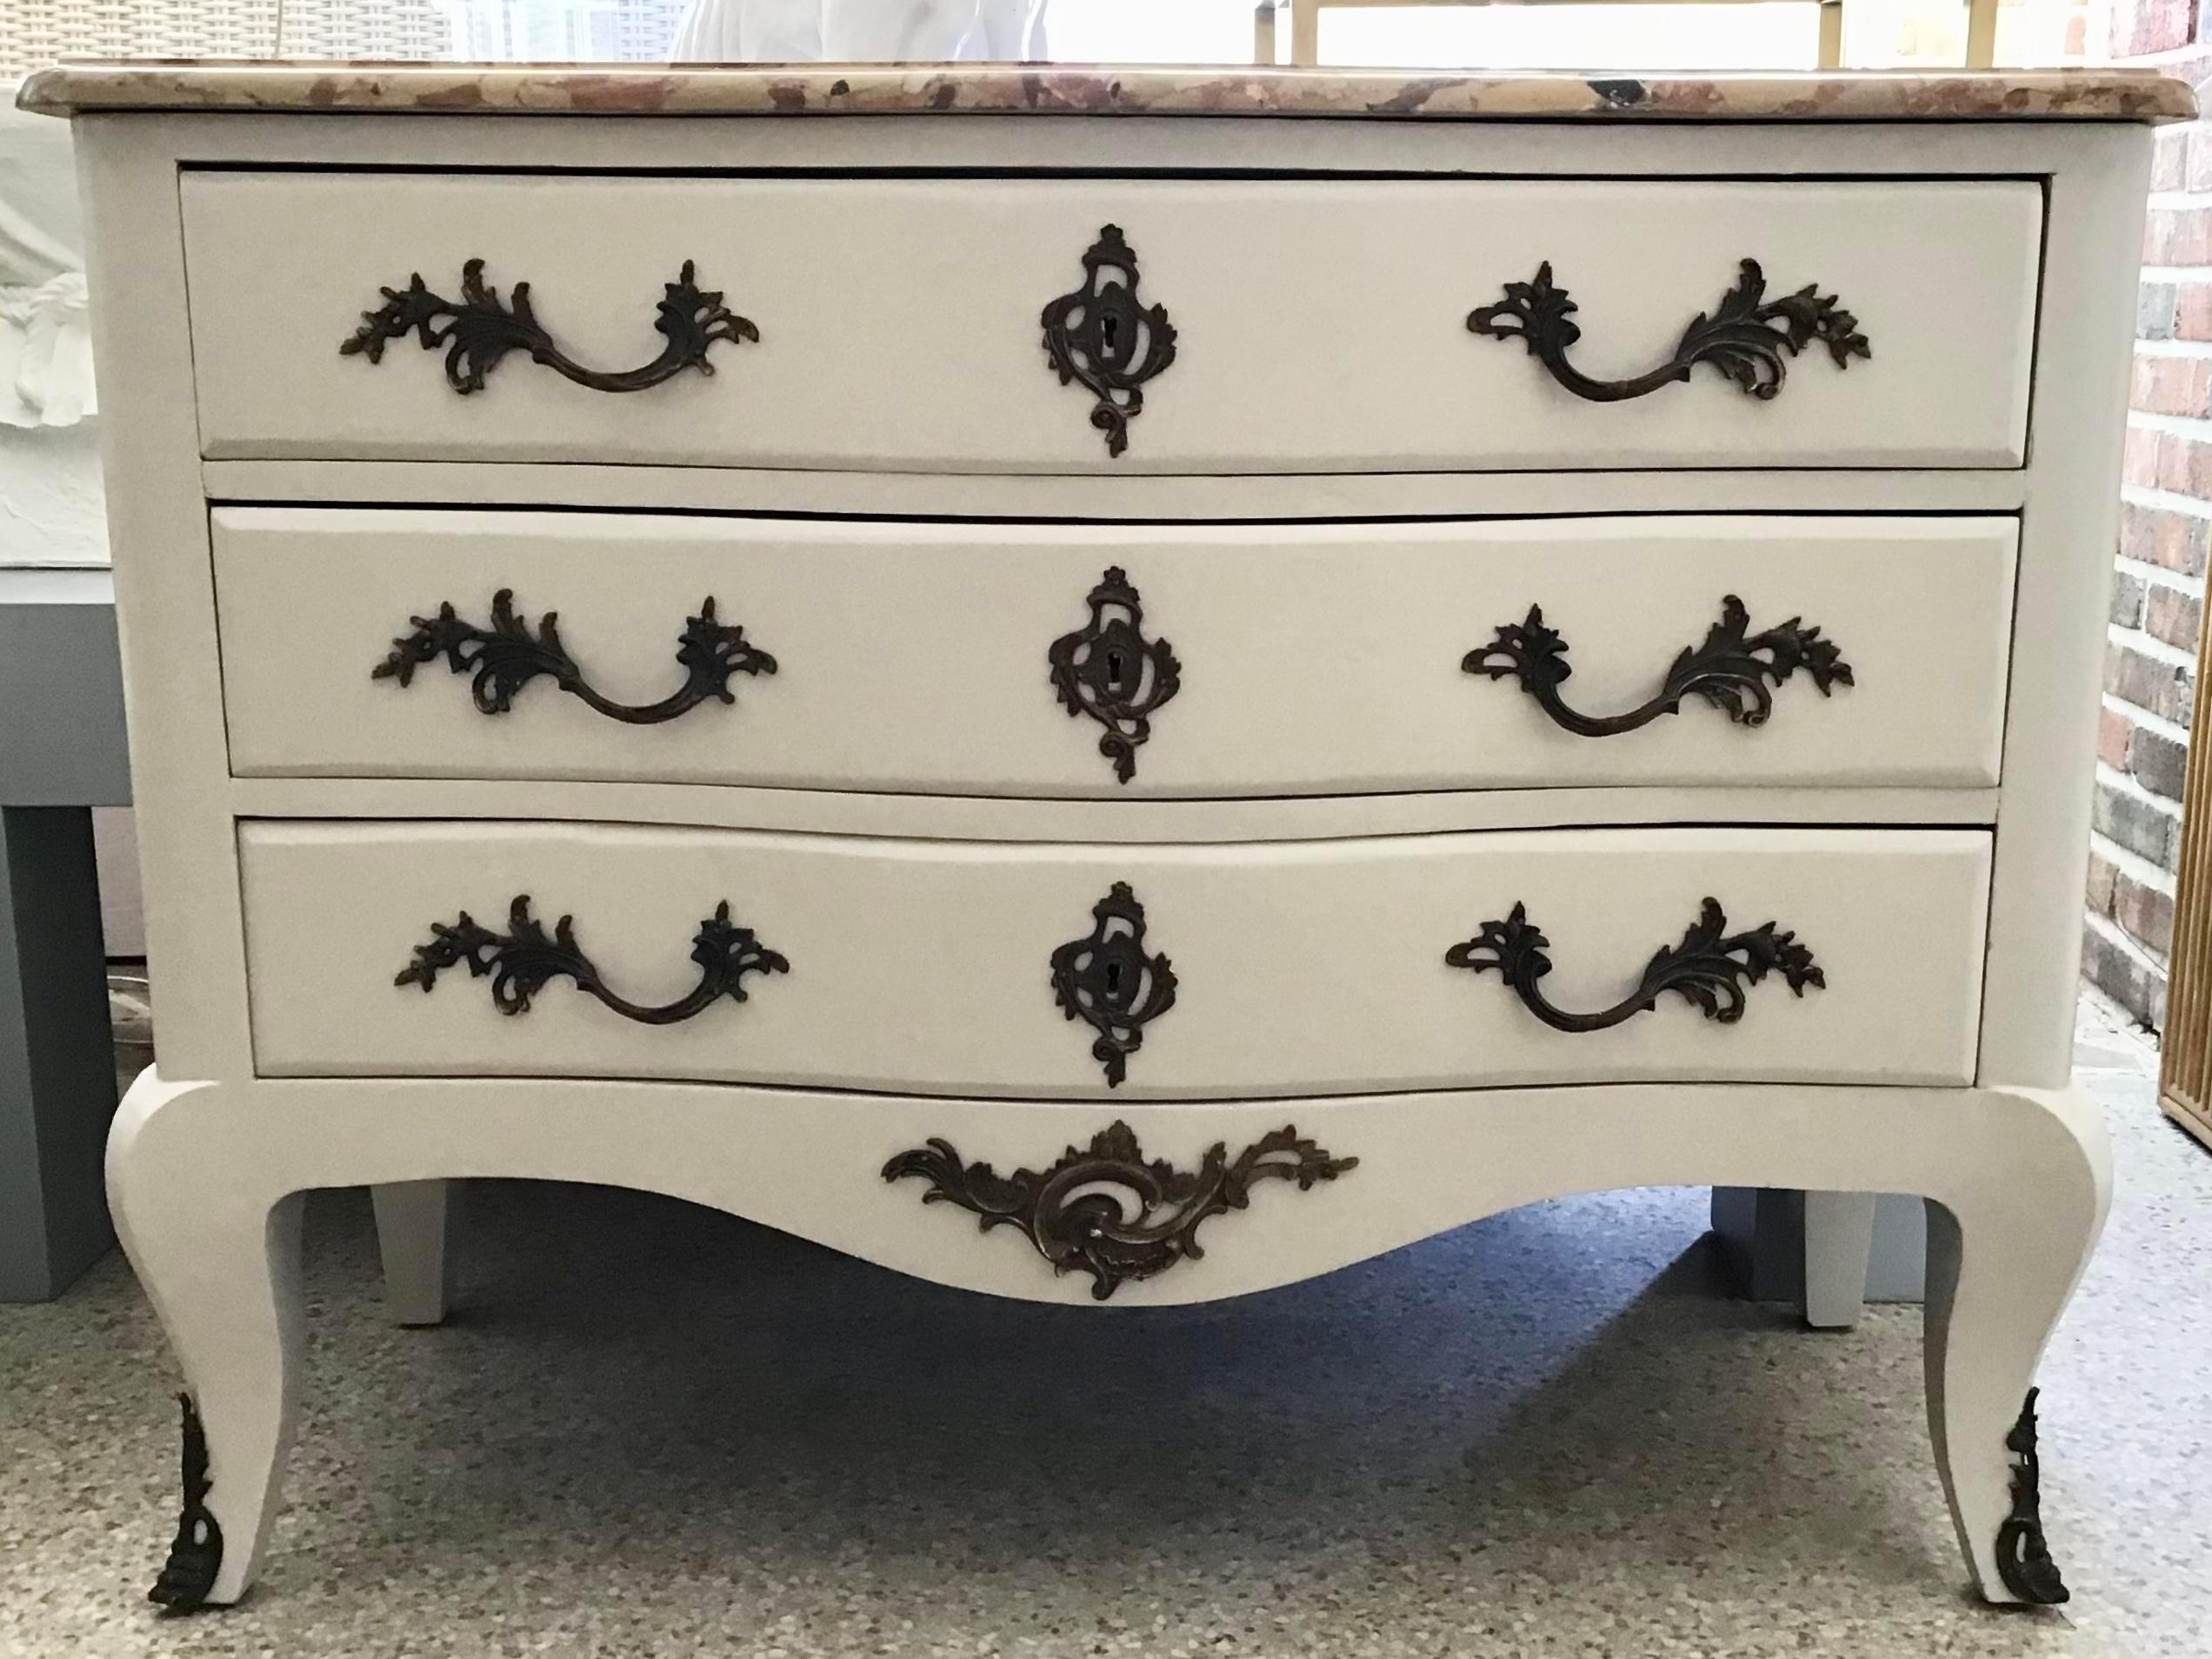 Newly lacquered in gray French transition style three-drawer dresser with original marble top. Great bronze details. This dresser does not include keys. Beautiful gray color goes with everything. Classic French style.